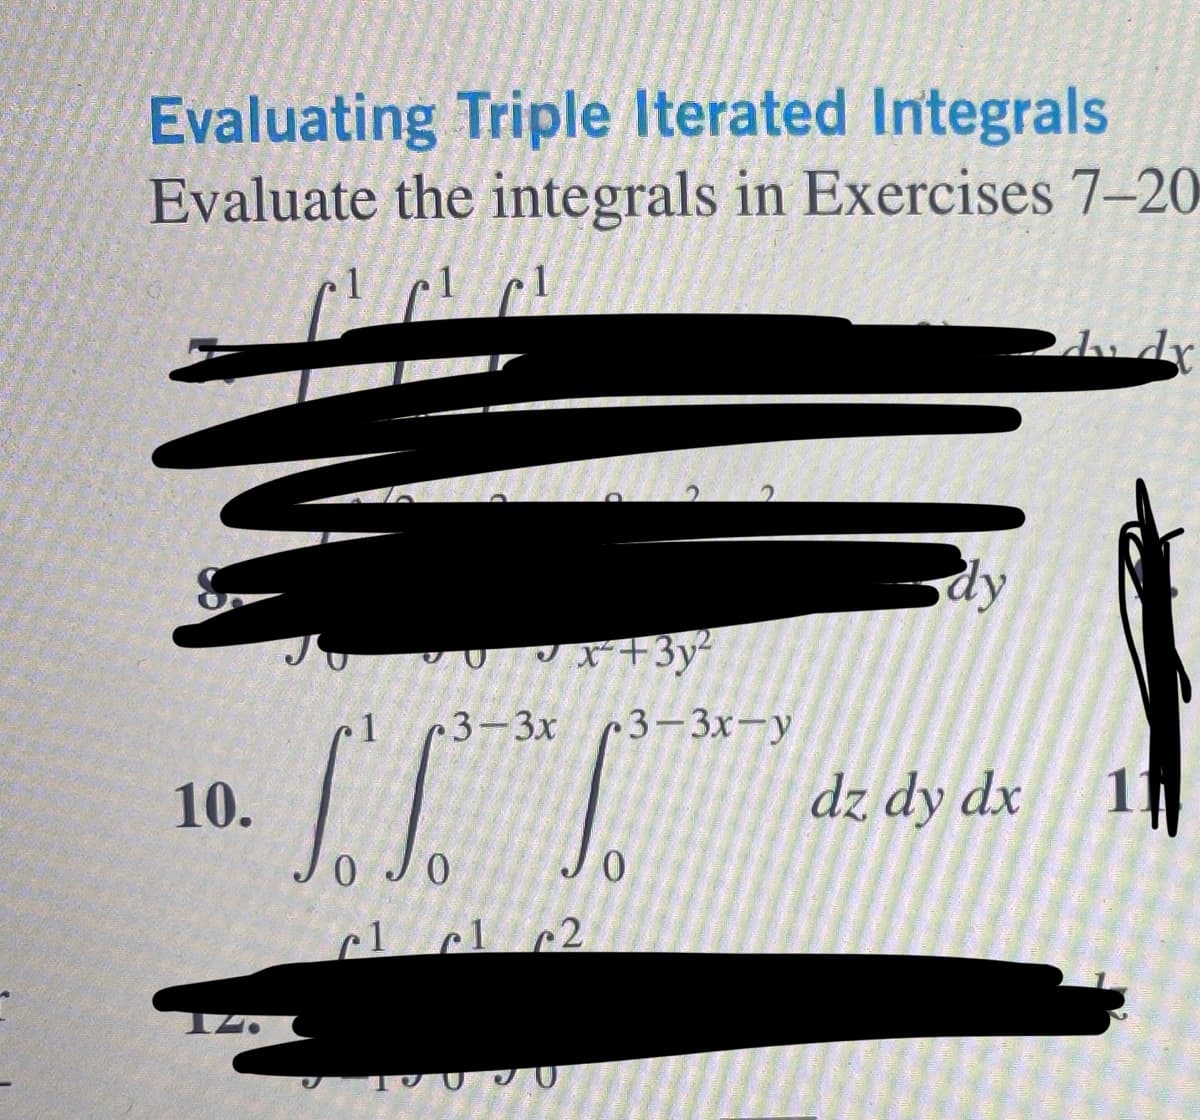 Evaluating Triple Iterated Integrals
Evaluate the integrals in Exercises 7-20
10.
$1
S S
0 JO
cl
✓x²+3y²
3-3x 3-3x-y
clc2
JU
0
dy
dz dy dx
du dr